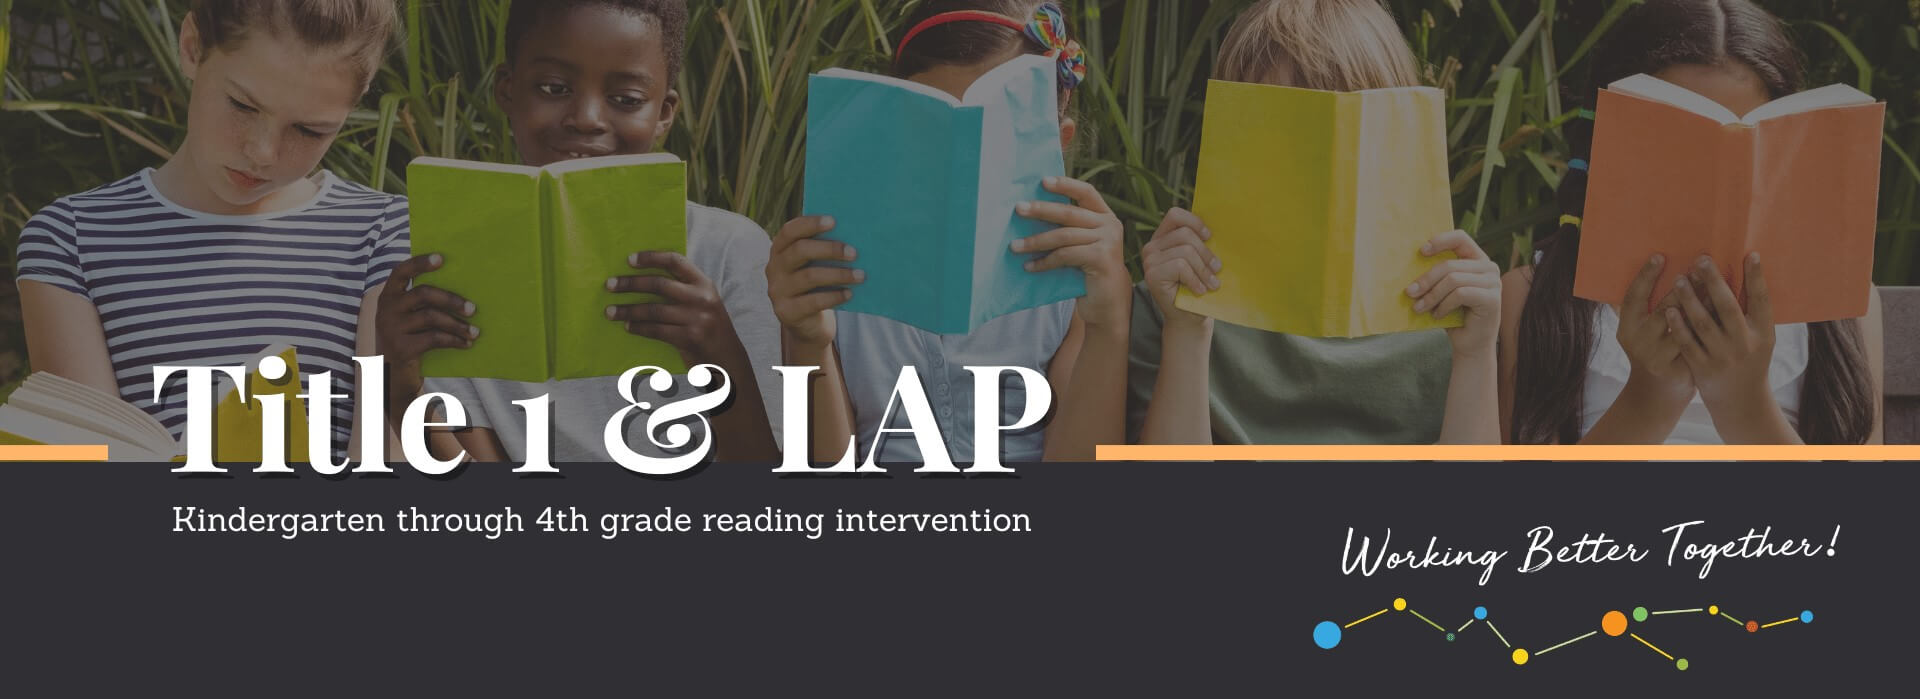 Title 1 and LAP kindergarten through 4th grade reading intervention